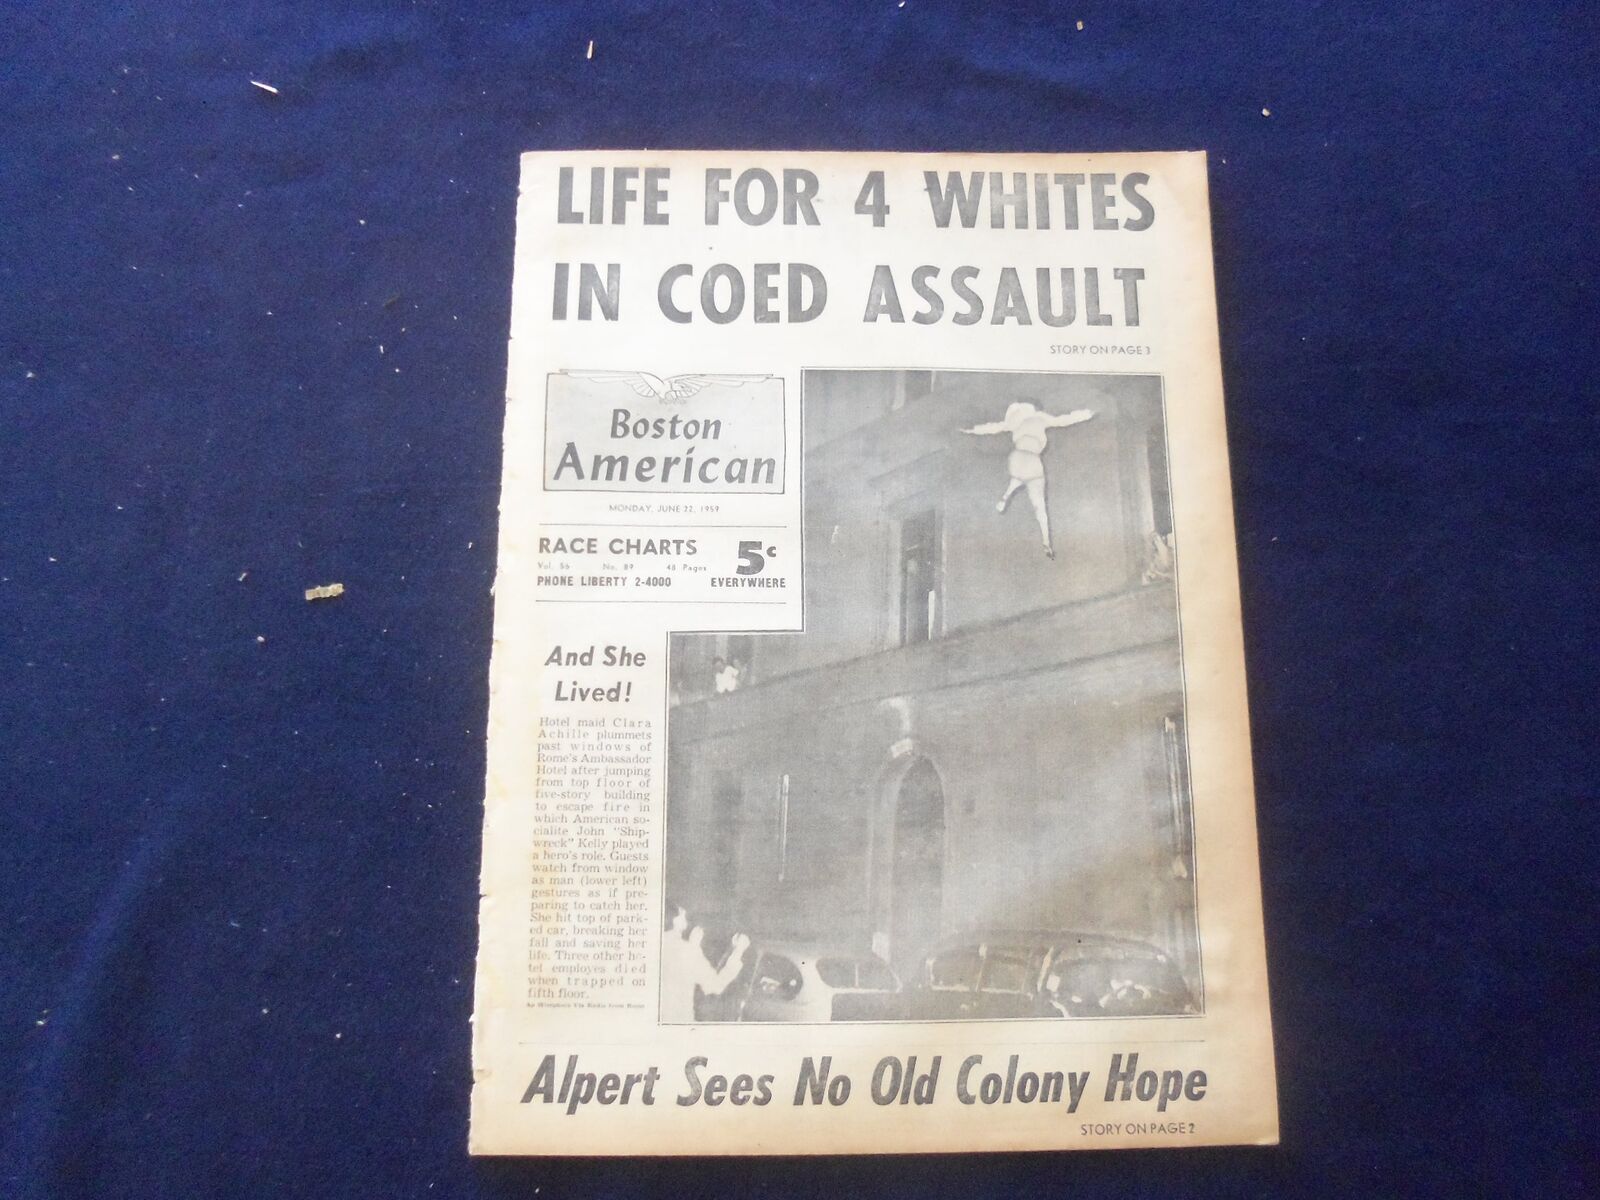 1959 JUNE 22 BOSTON AMERICAN NEWSPAPER-LIFE FOR 4 WHITES IN COED ASSULT- NP 6239